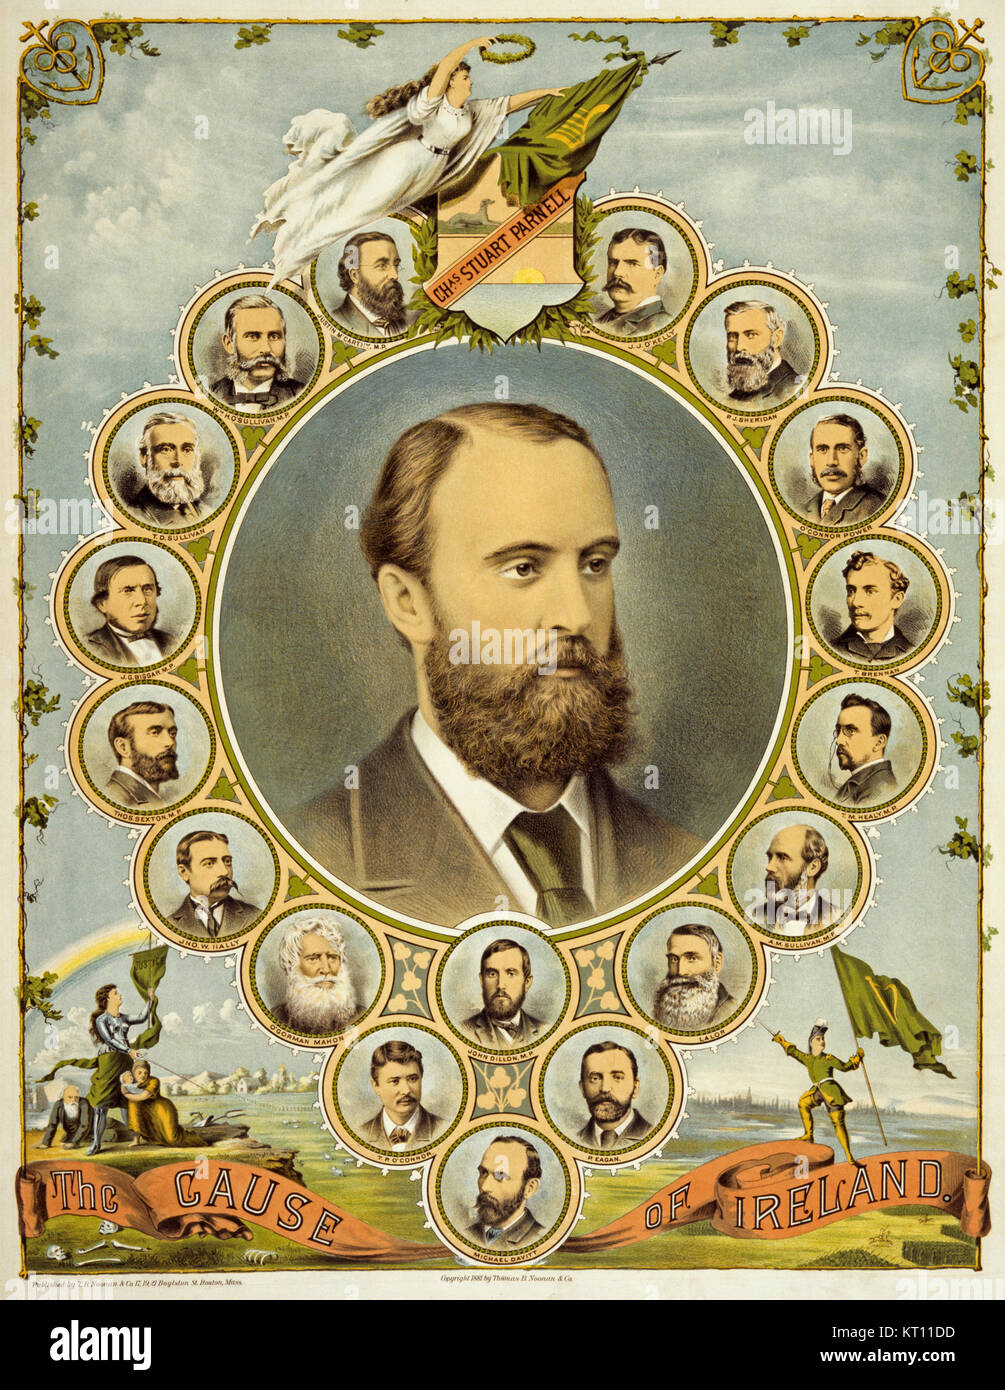 A poster from 1891, printed in America, supporting the Irish demand for Home Rule.  At the centre is a portrait of the Irish Nationalist politician Charles Stewart Parnell. He is surrounded by portraits of other prominent Nationalists. Stock Photo